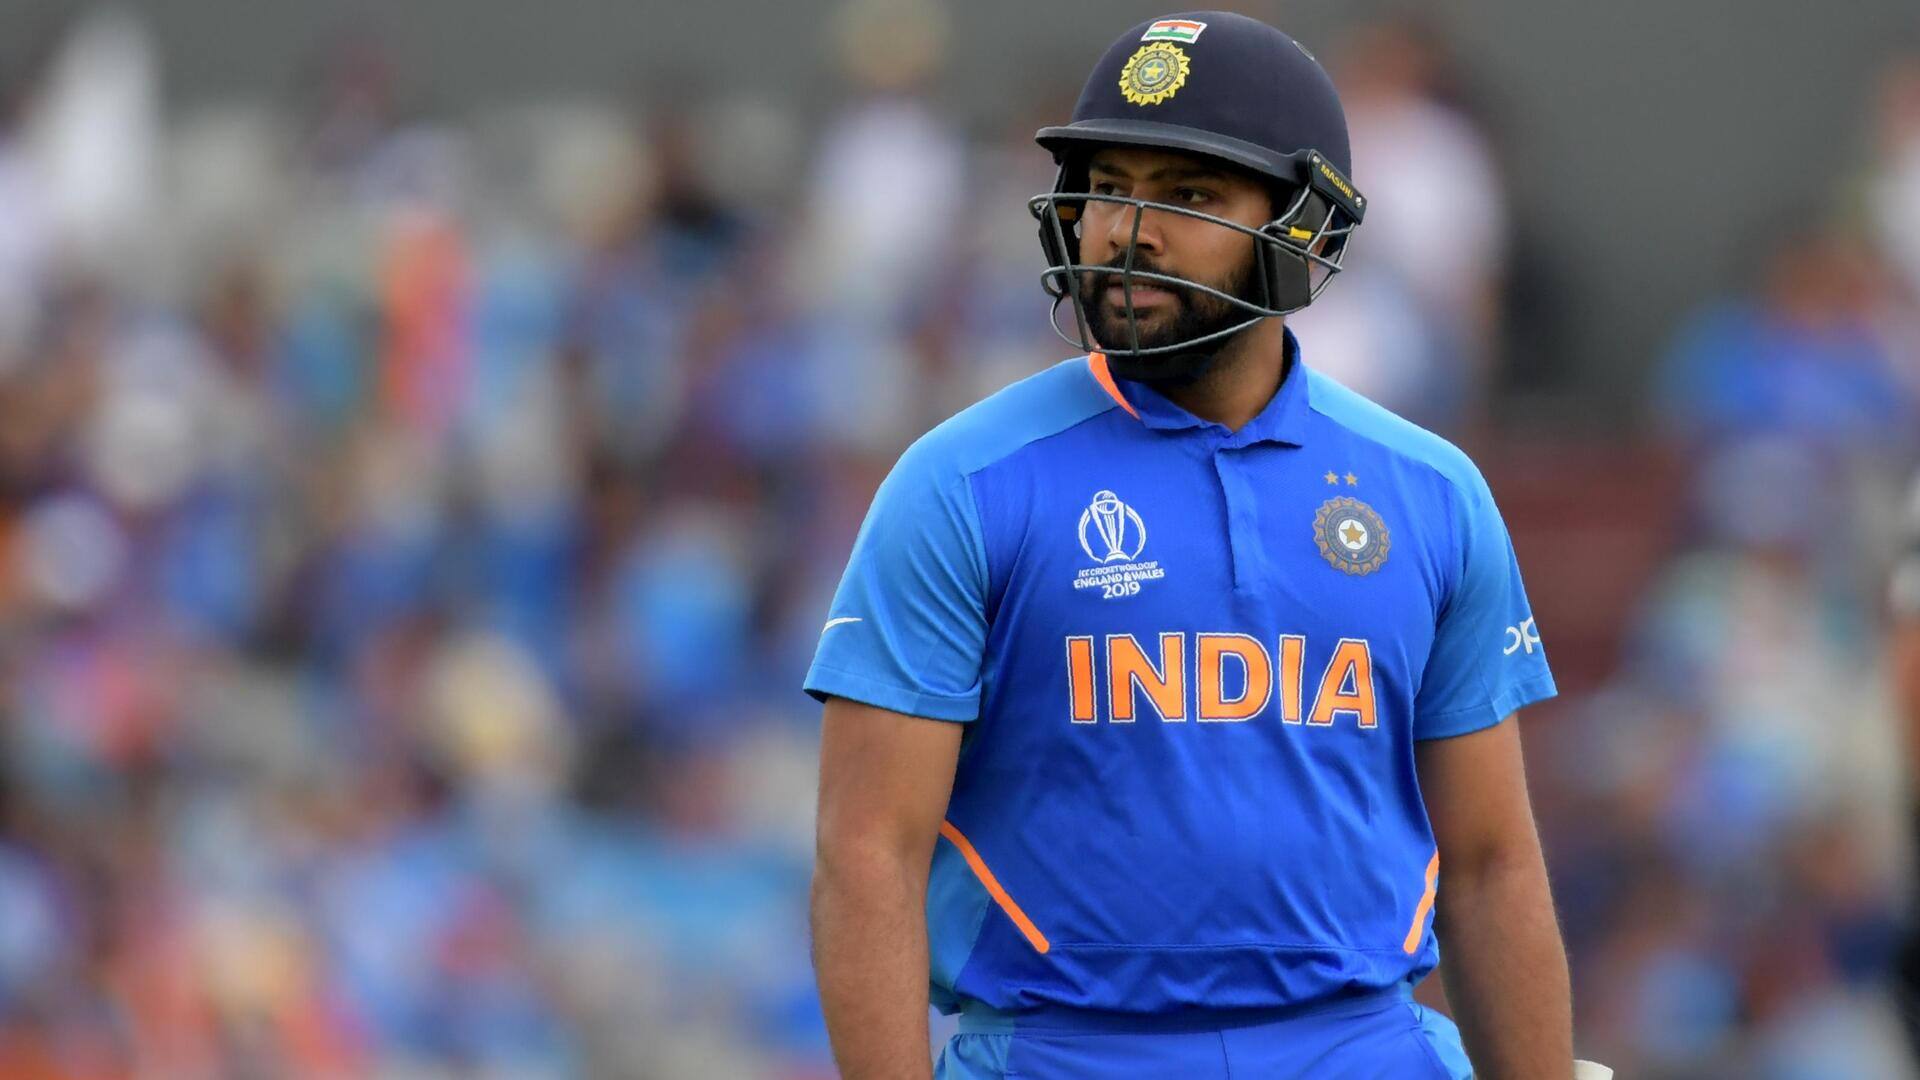 ICC World Cup: Rohit Sharma registers his 16th ODI duck